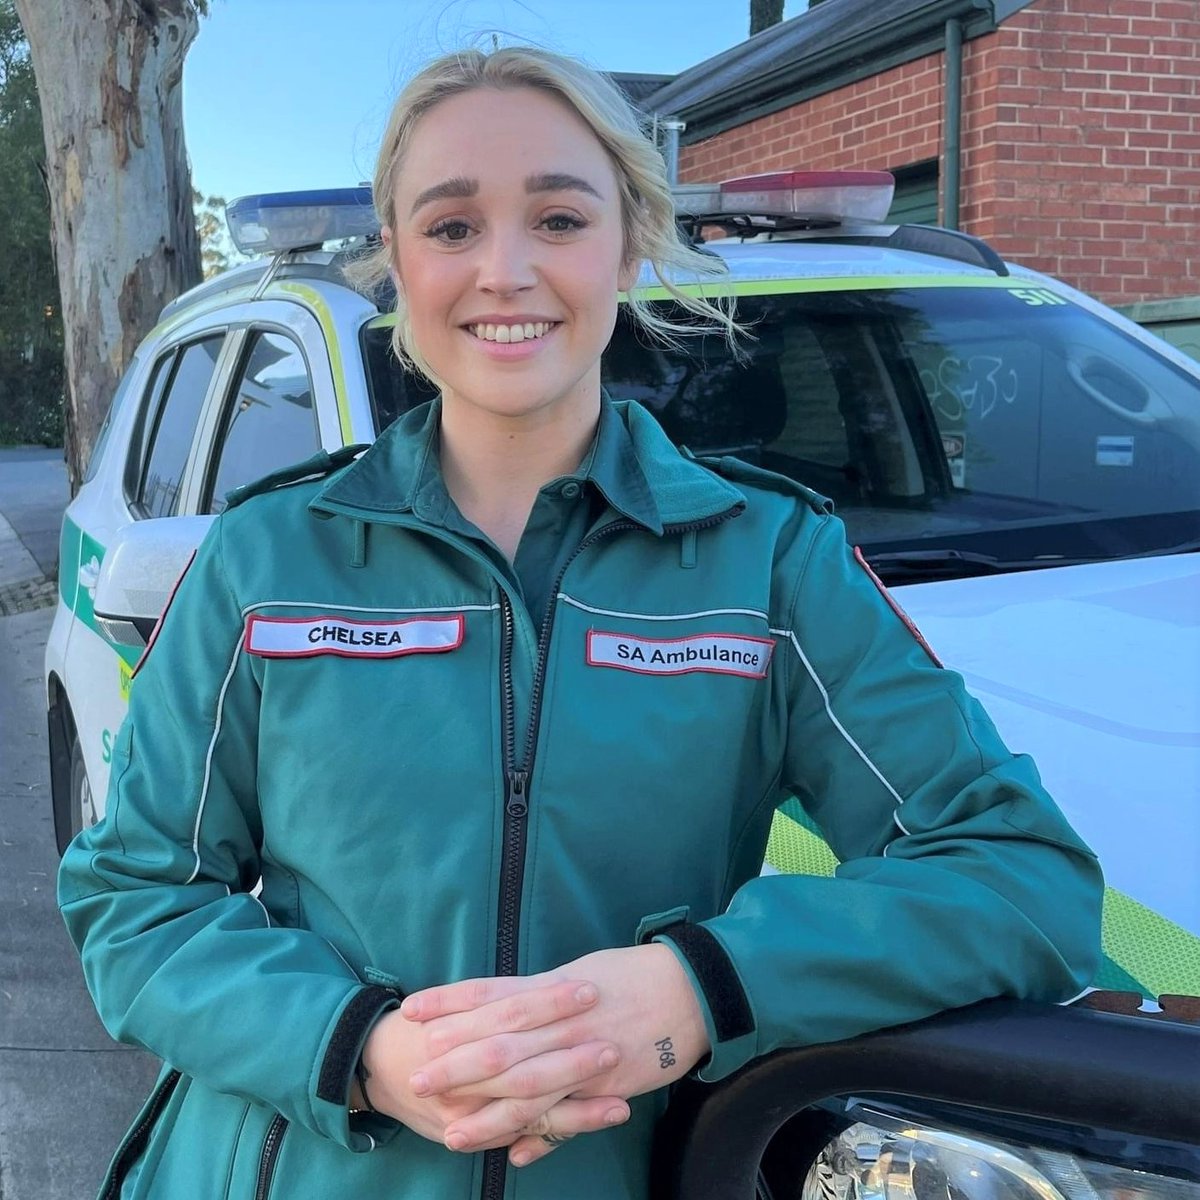 “I’ve been welcomed with open arms, found a basketball team and opportunities to upskill.” That’s Chelsea sorted since moving to South Australia in our push to recruit experienced paramedics and intensive care paramedics. Looking for new opportunities? shorturl.at/qJLS7